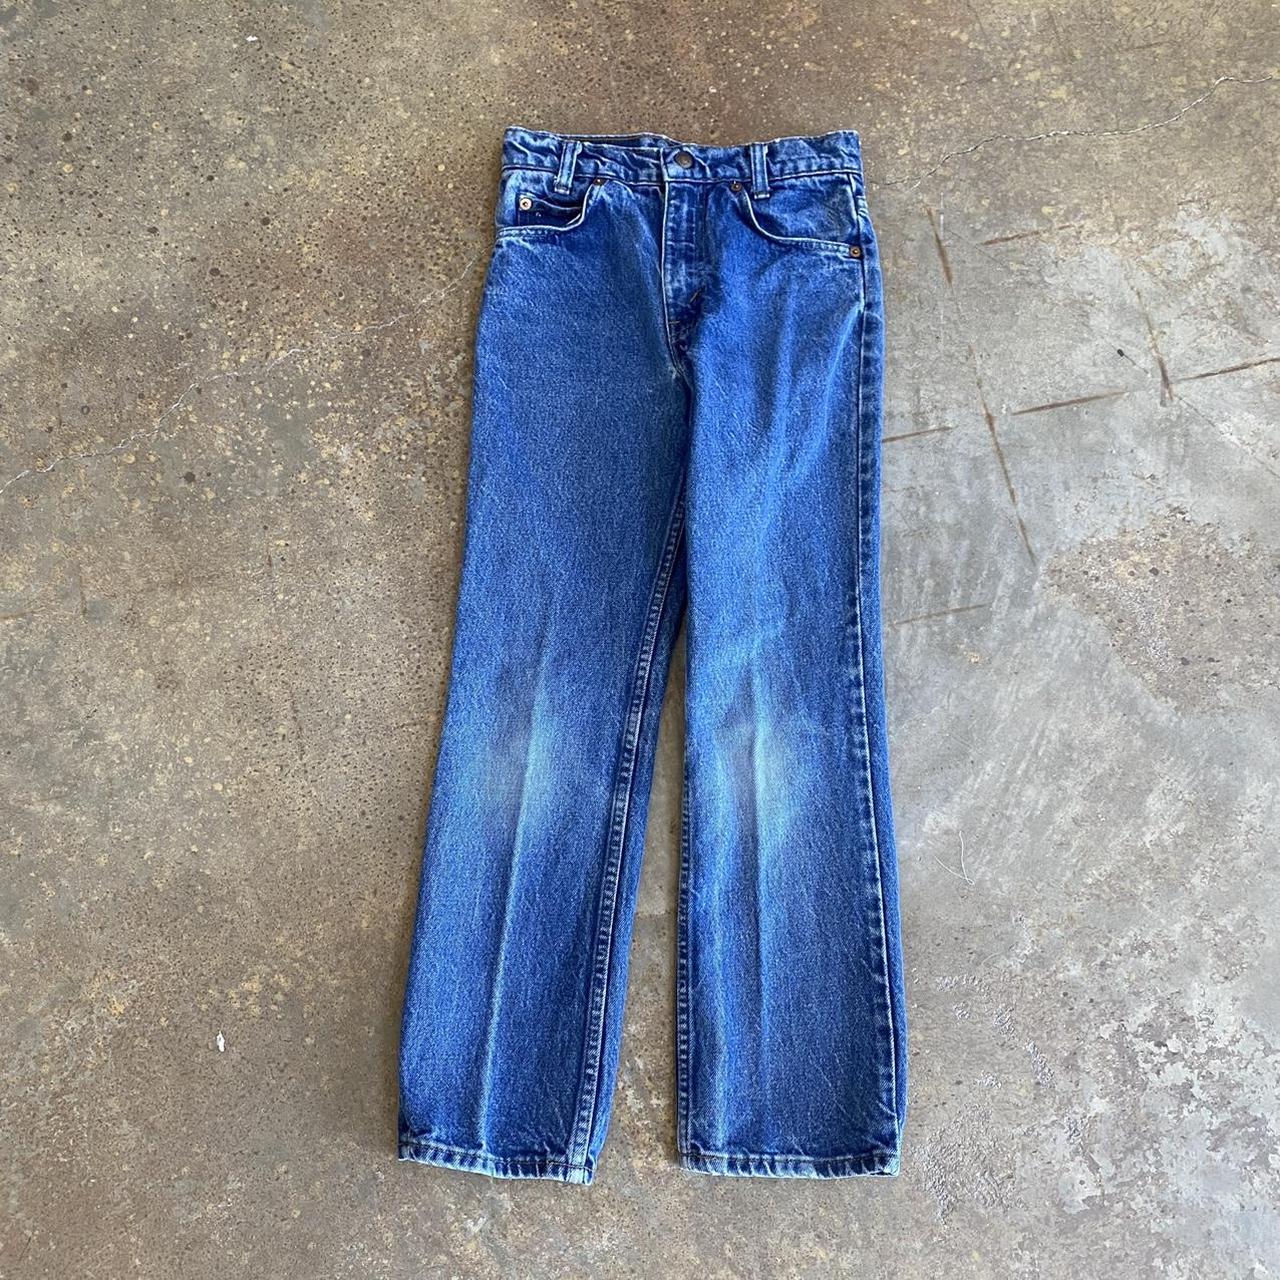 Levi's Navy and Blue Jeans | Depop